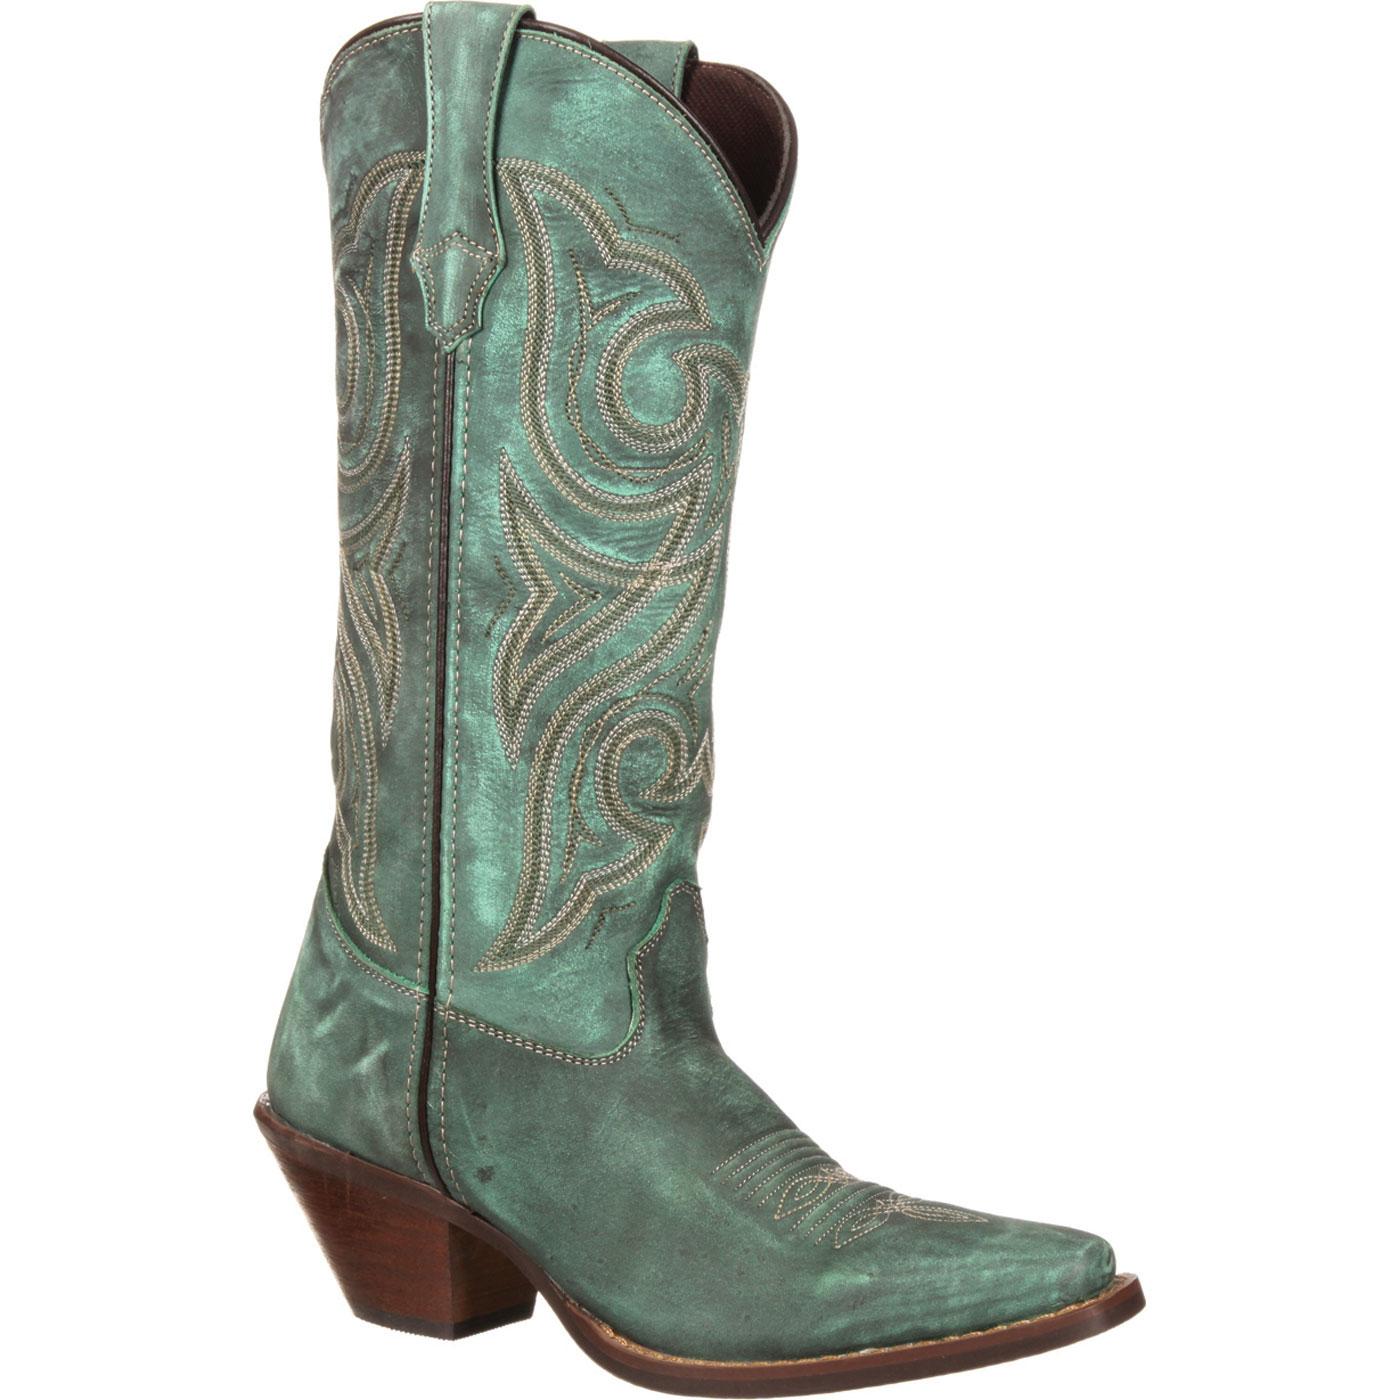 Crush by Durango Women's Marbled Turquoise Western Boot. Comfortable ...